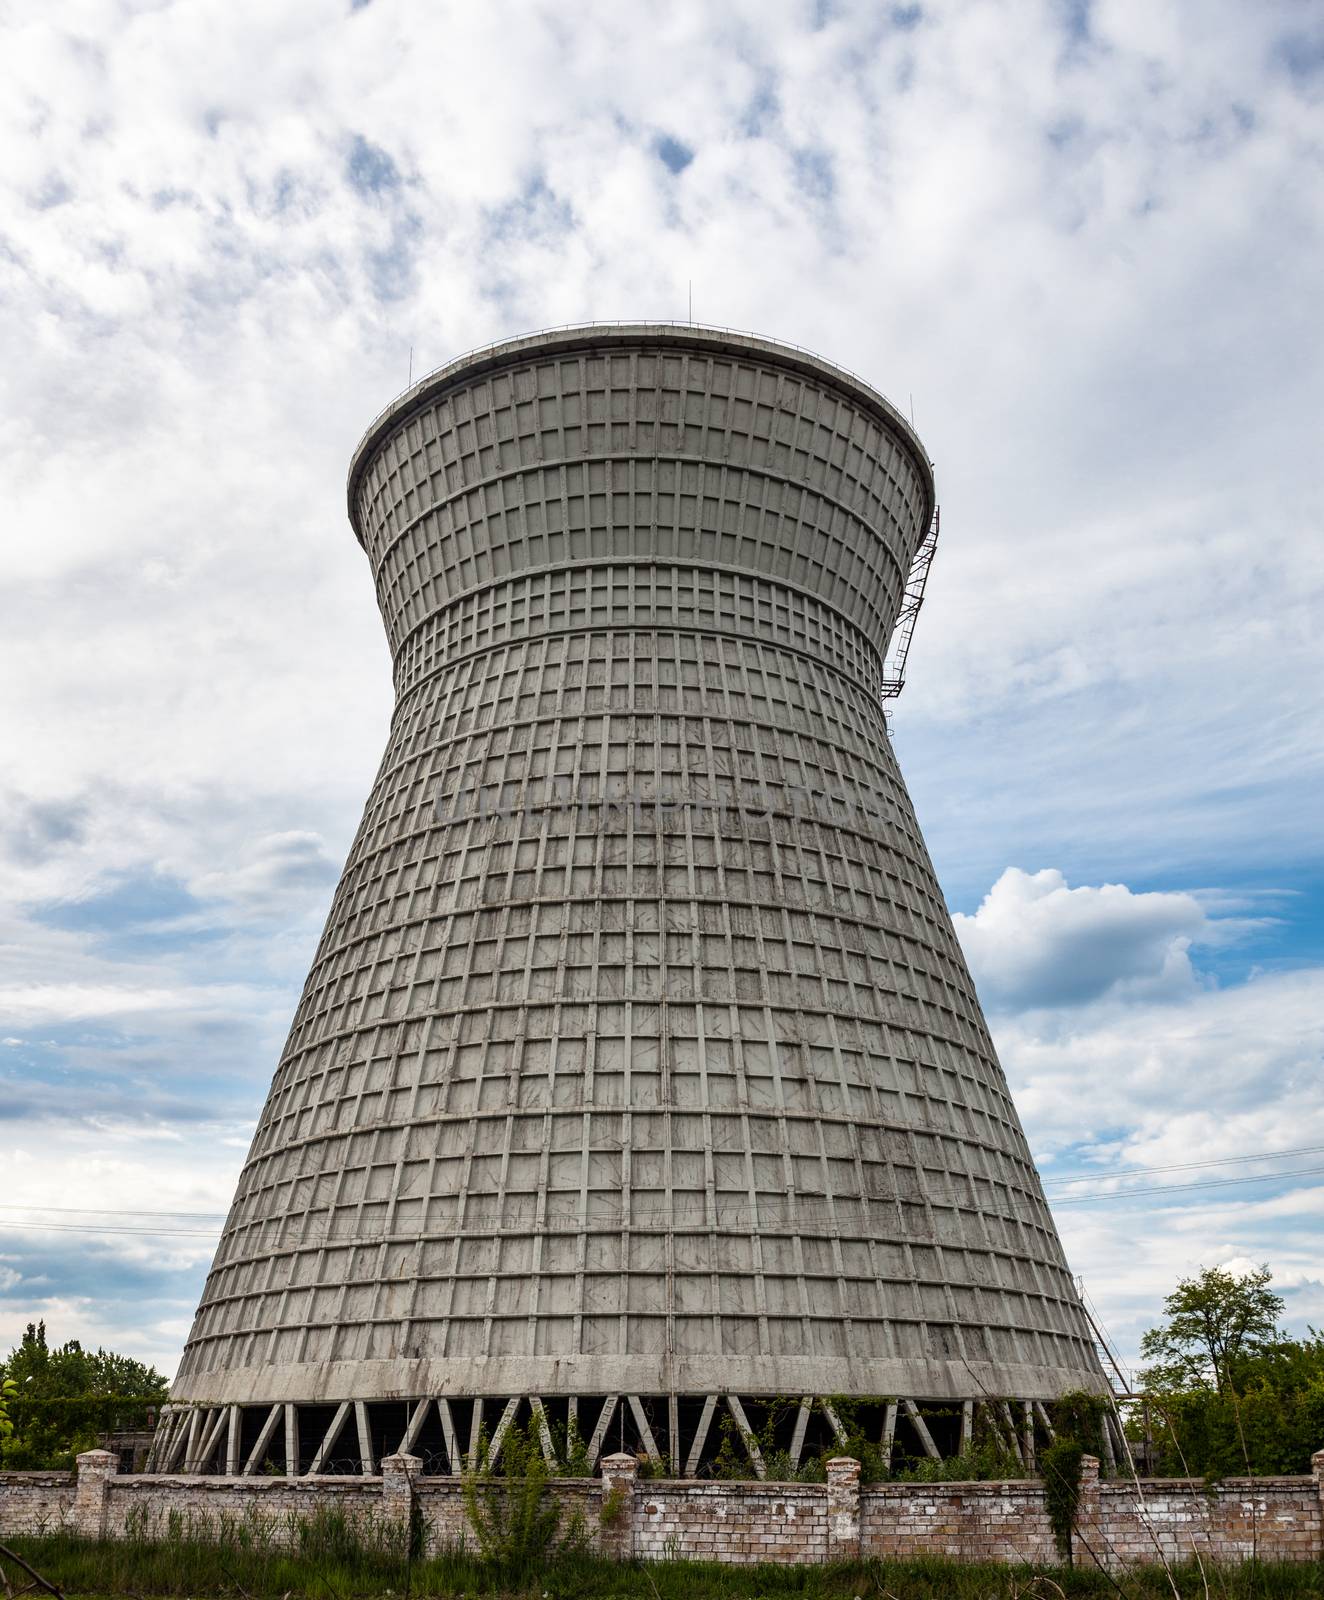 Cooling tower of the cogeneration plant in Kyiv, Ukraine.